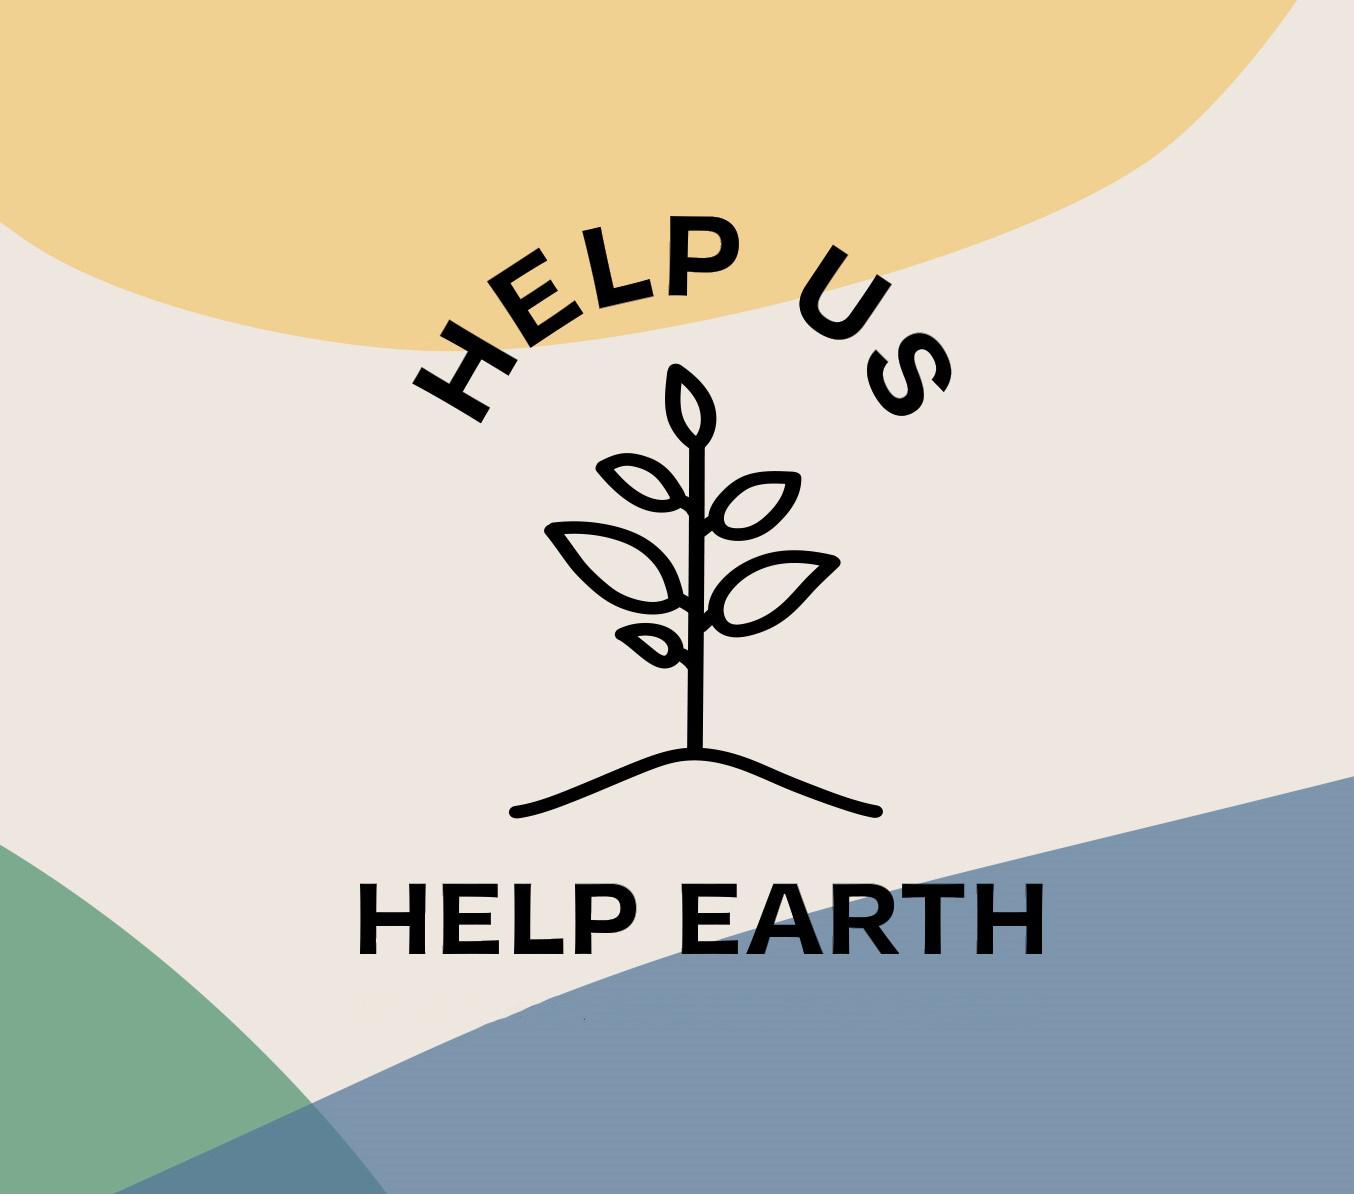 Product Earth Day Giveaway 2022 | CreativeMC image